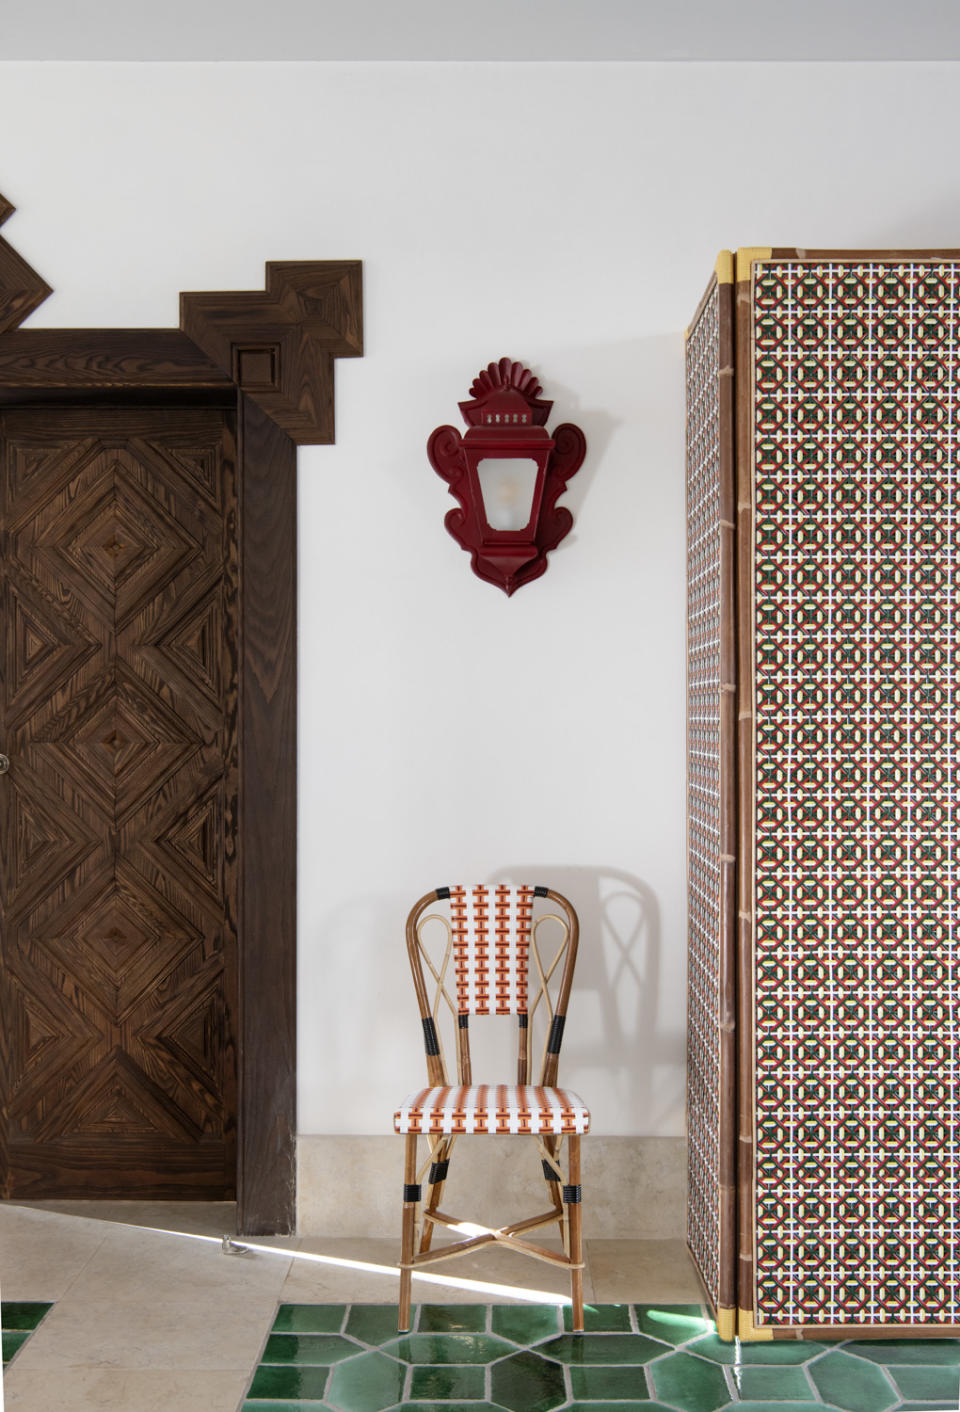 The Bruant chair from the Maison Gatti as seen at Christian Louboutin's Vermelho Melides hotel in Portugal.